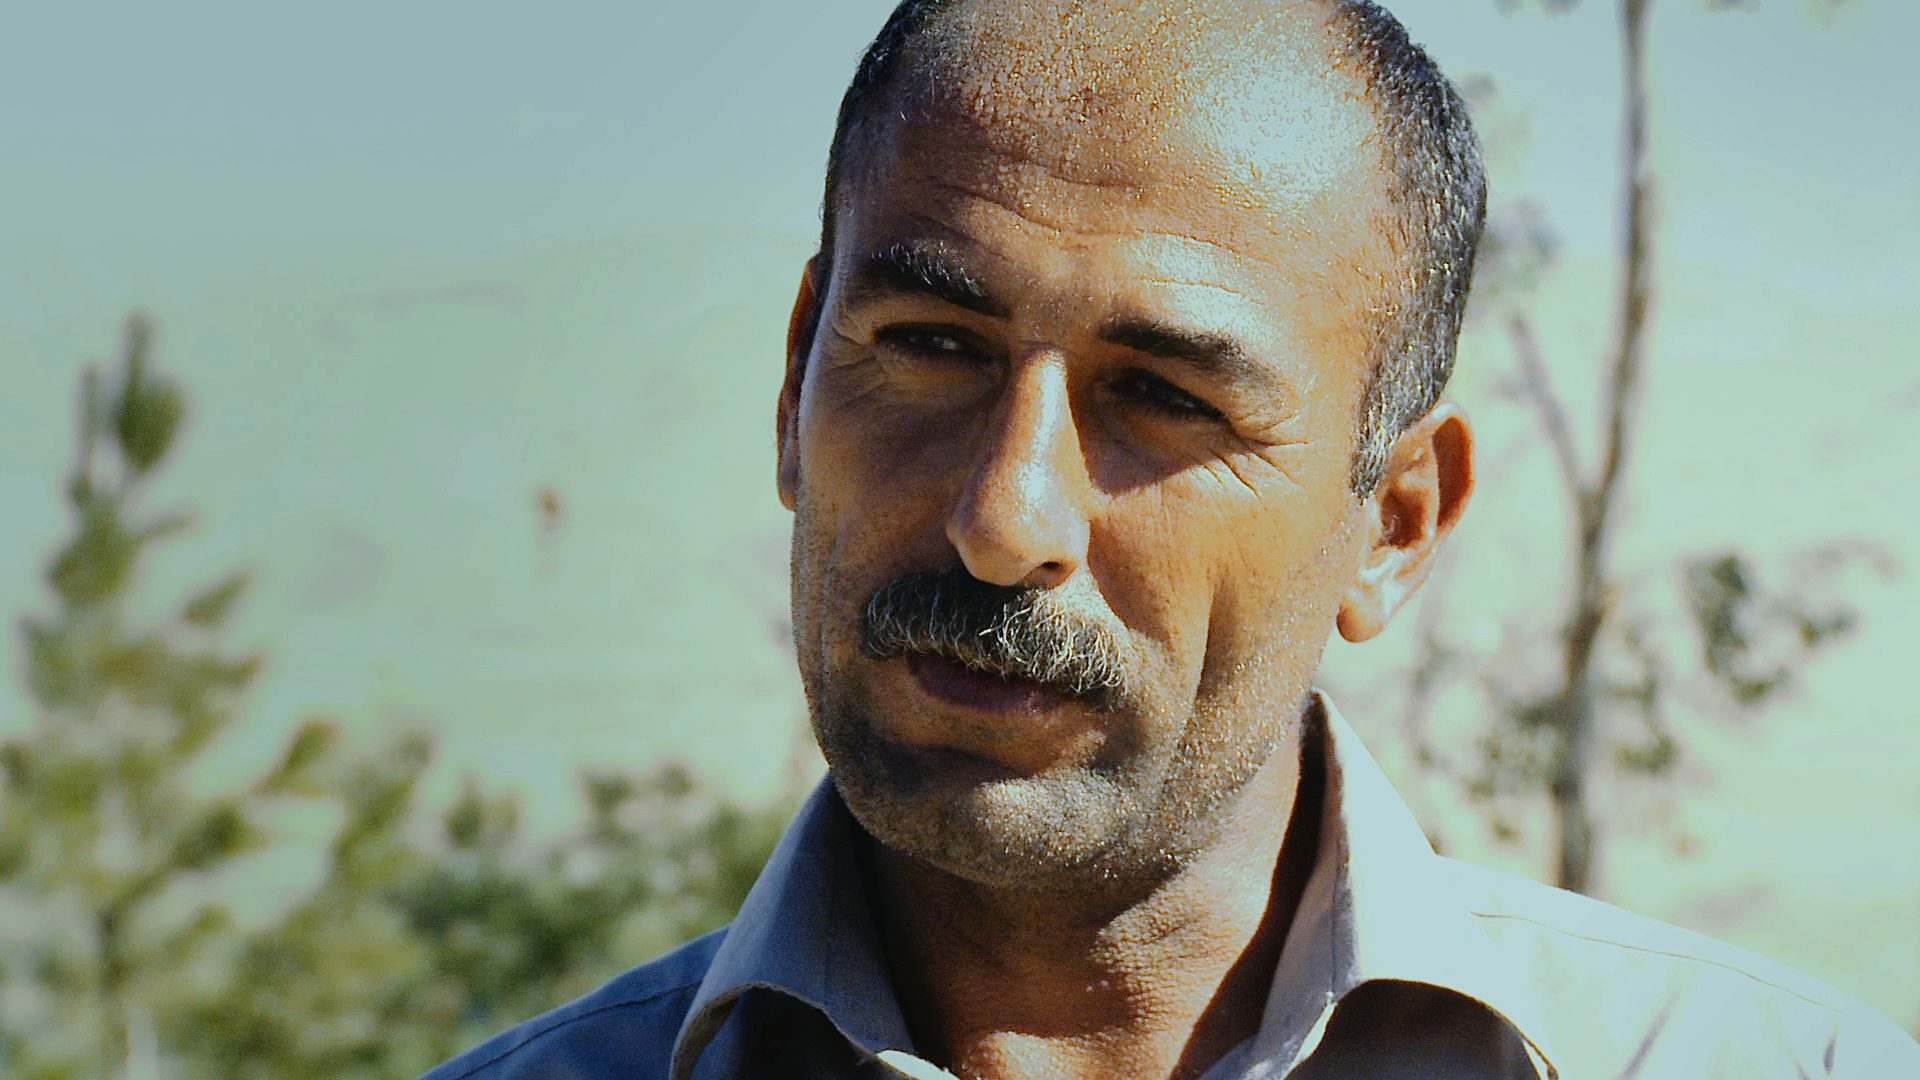 After a chemical attack in May 1988, MUSTAFA KHADER ISMAEL fled with other villagers from Goptapa. Fearing Mustafa's chemical burns would betray who they were, his companions abandoned him in a field. He experienced extreme pain and despair until a Kurdish collaborator with the Iraqi army ("jash") unexpectedly helped him find refuge.